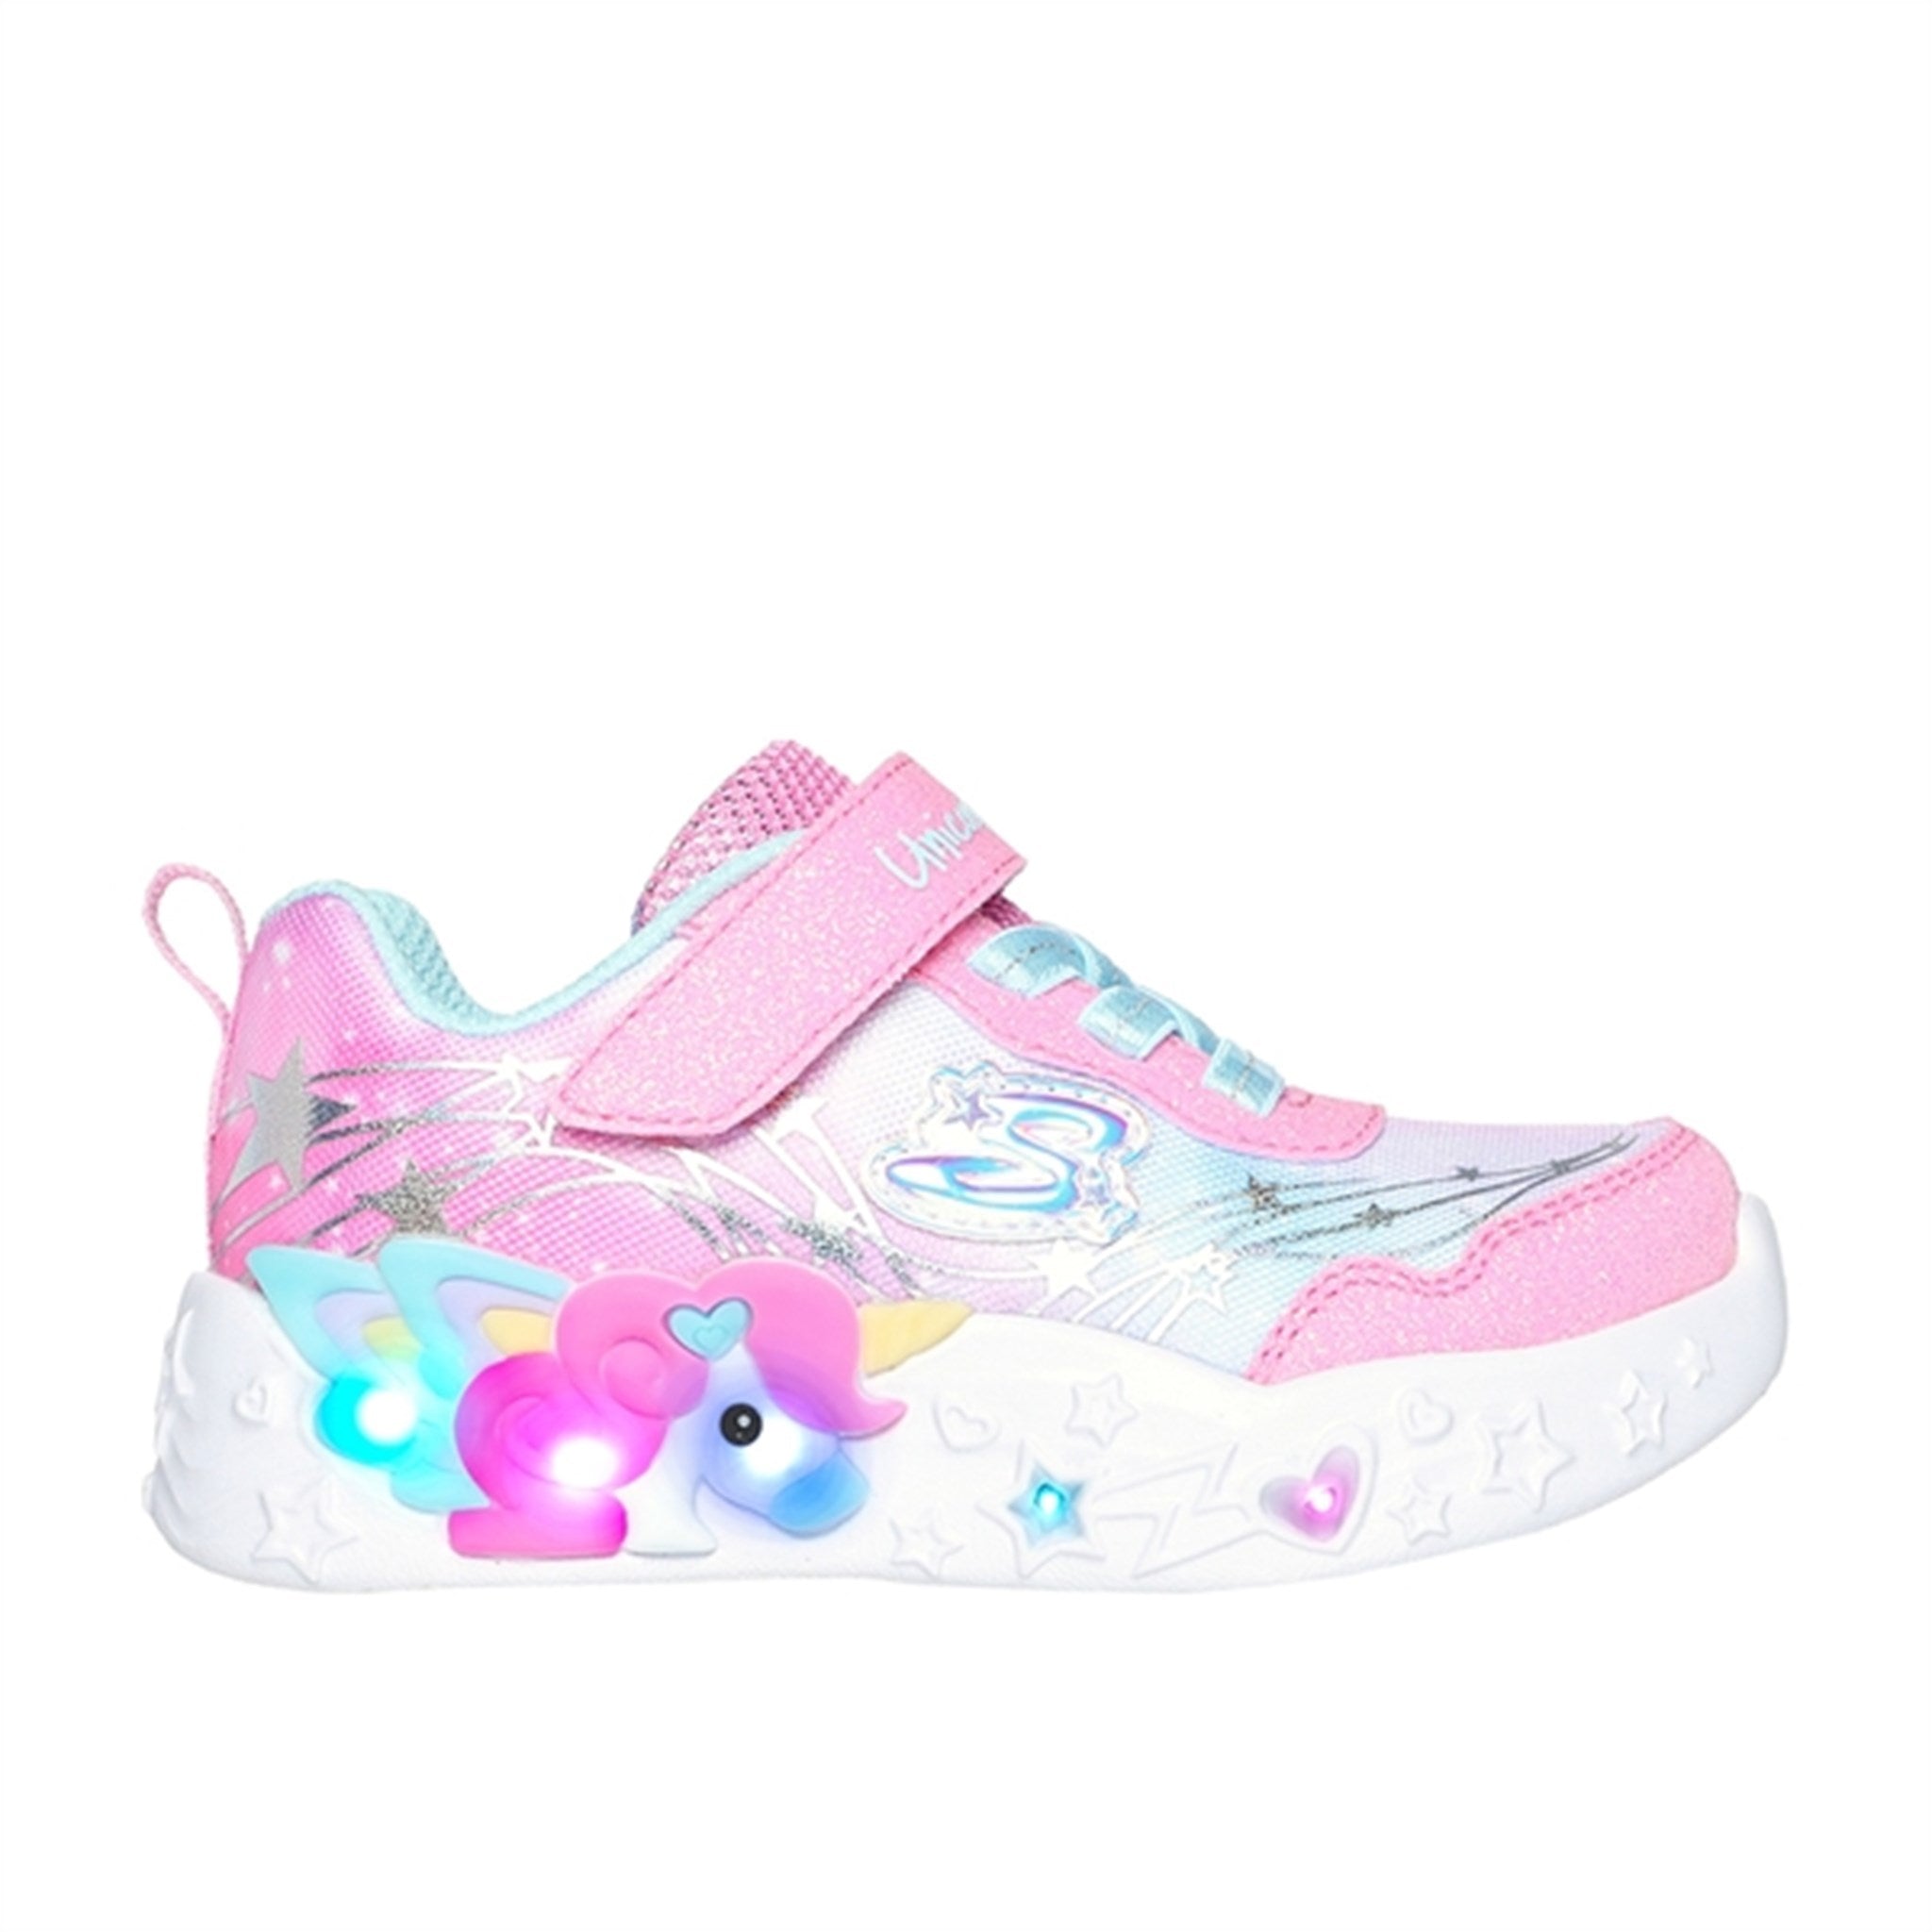 Skechers Unicorn Dreams Ombre Print & Star Shoe Pink Turquoise 2